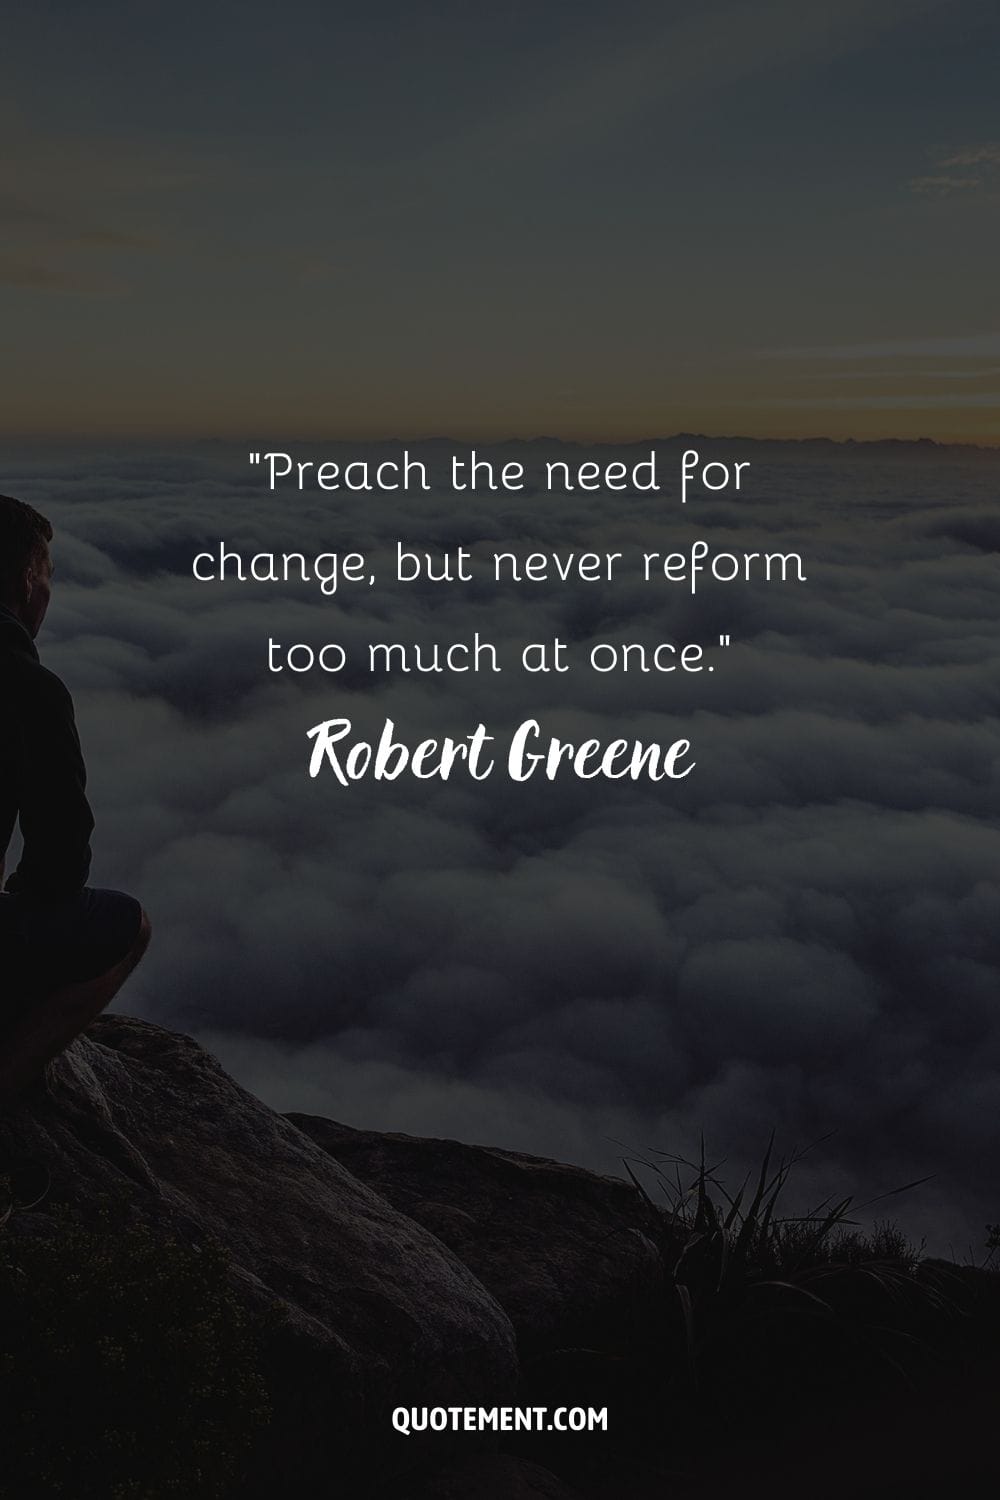 “Preach the need for change, but never reform too much at once.” ― Robert Greene, The